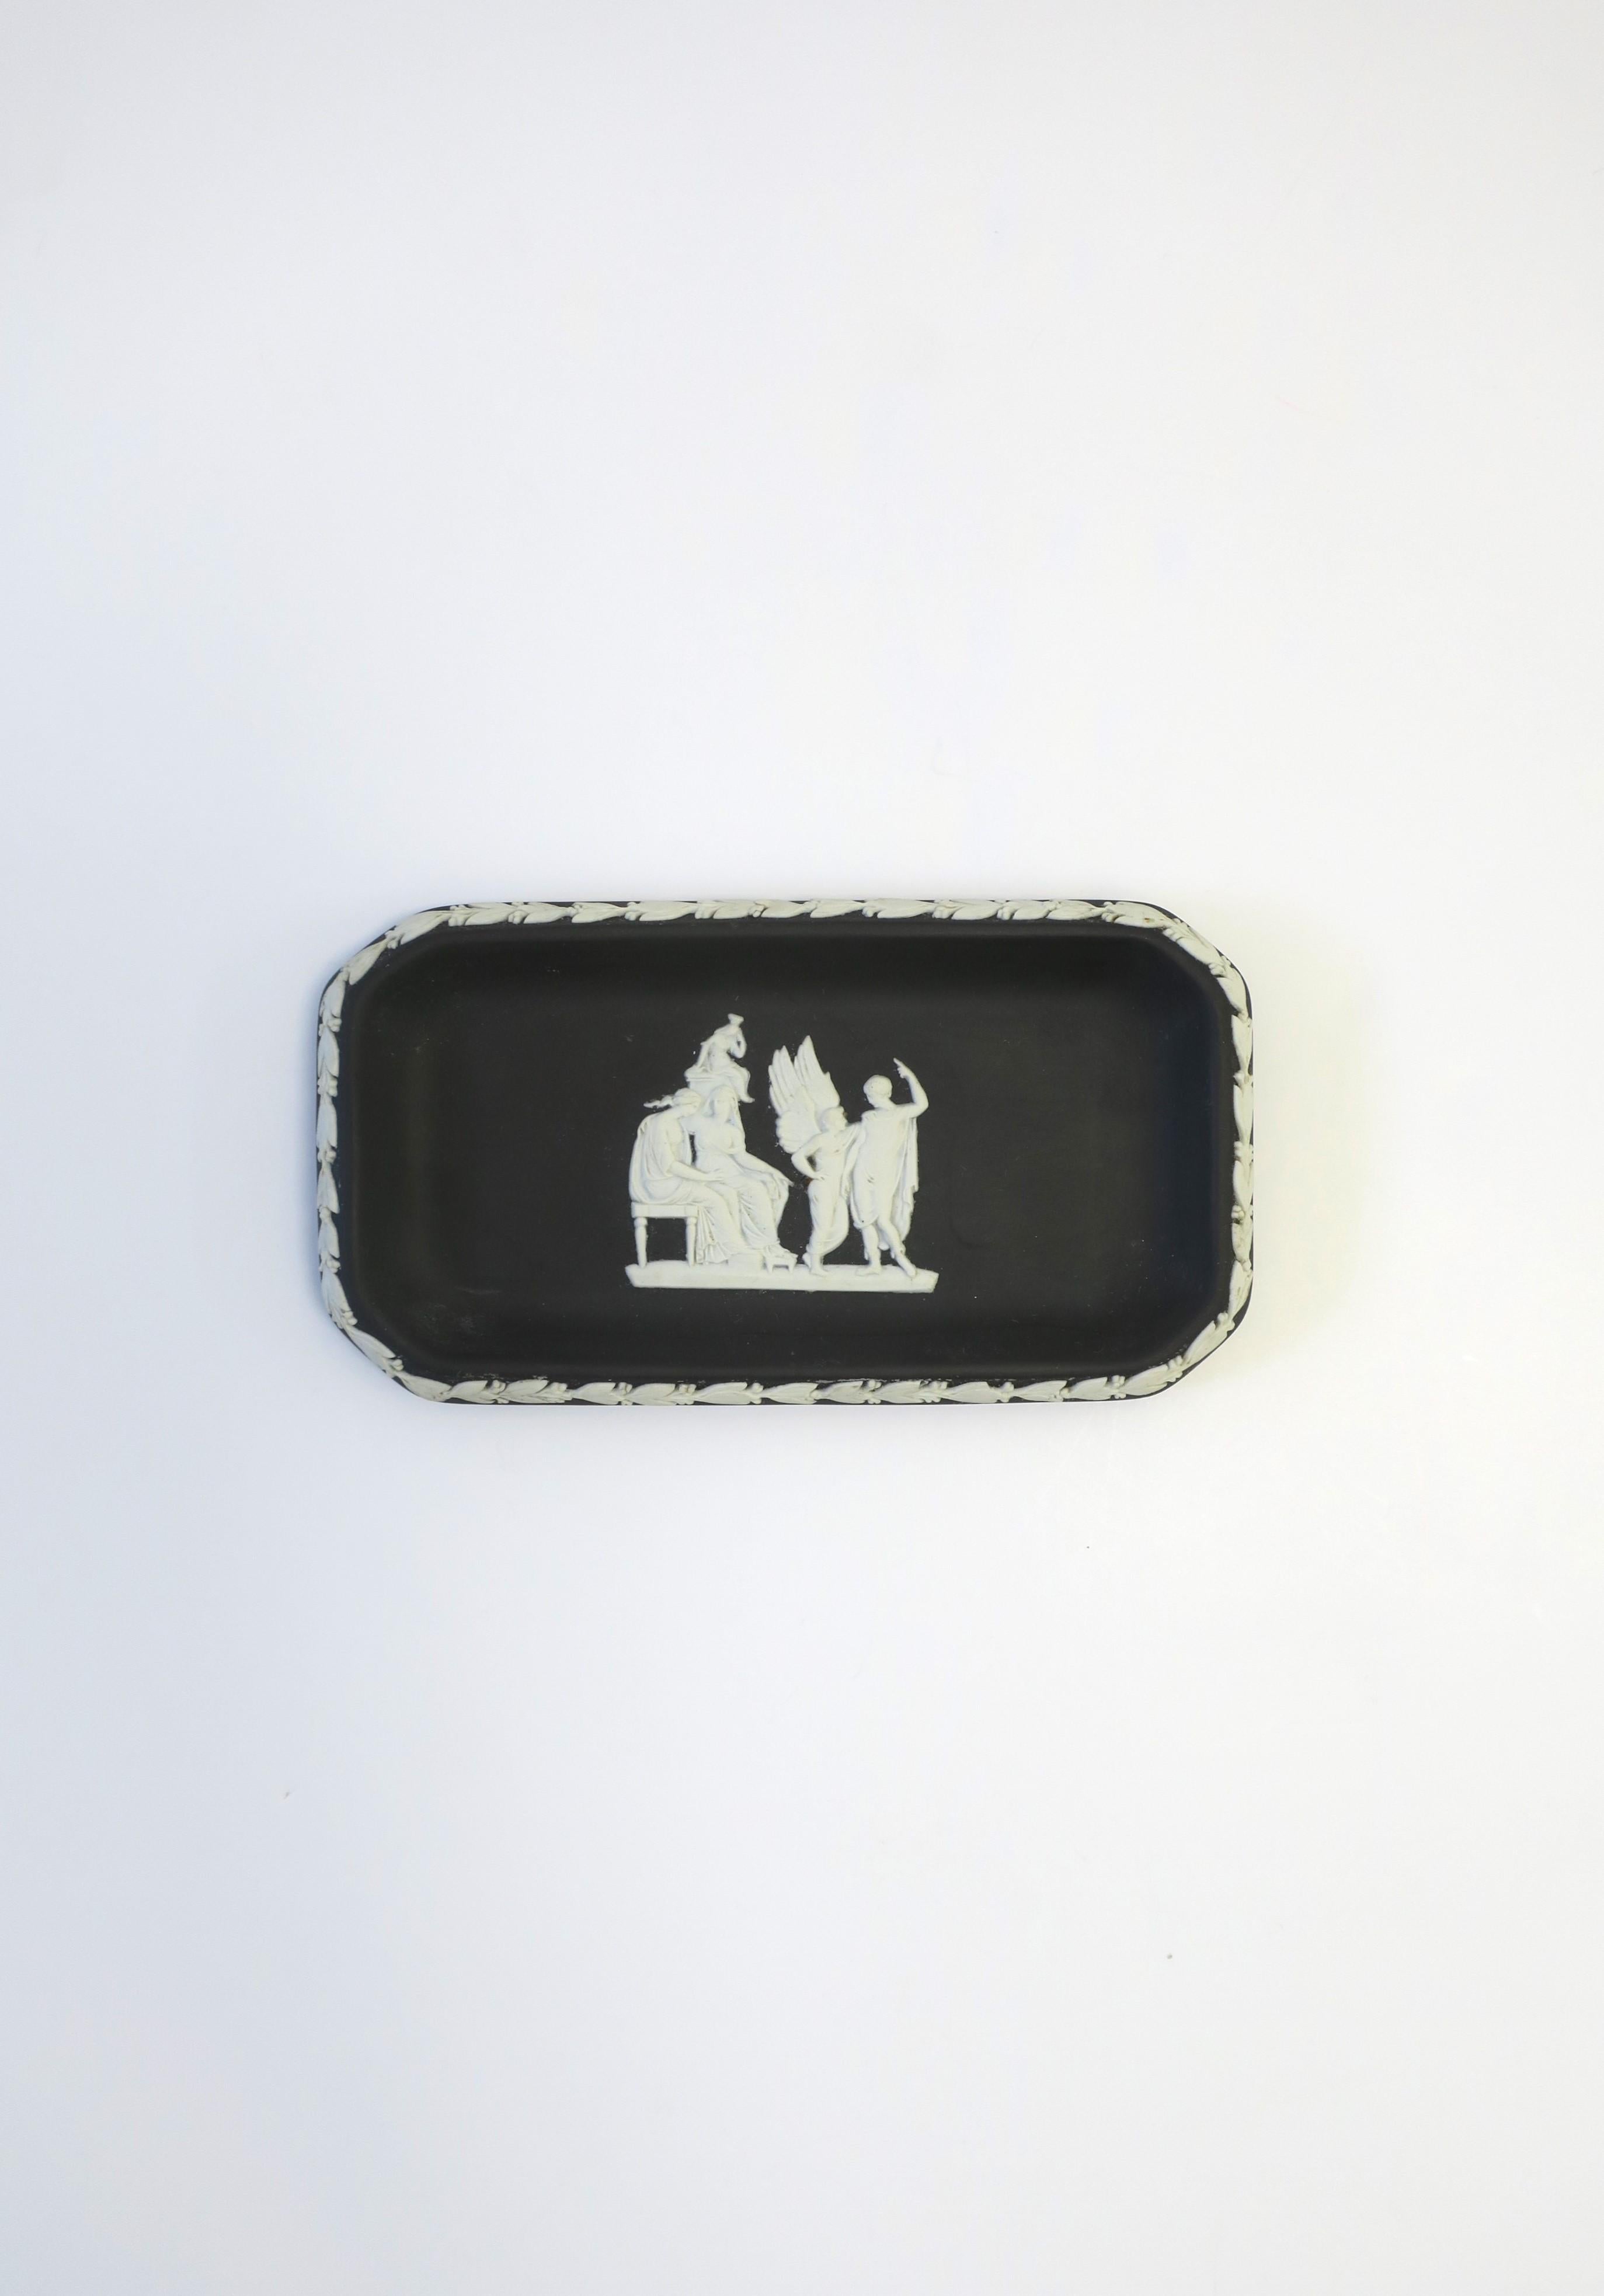 An English Wedgwood Jasperware black basalt and white stoneware rectangular jewelry dish with Neoclassical design, 1963, England. Piece is a matte black basalt stoneware with a white Neoclassical raised relief center and leaf design around edge.